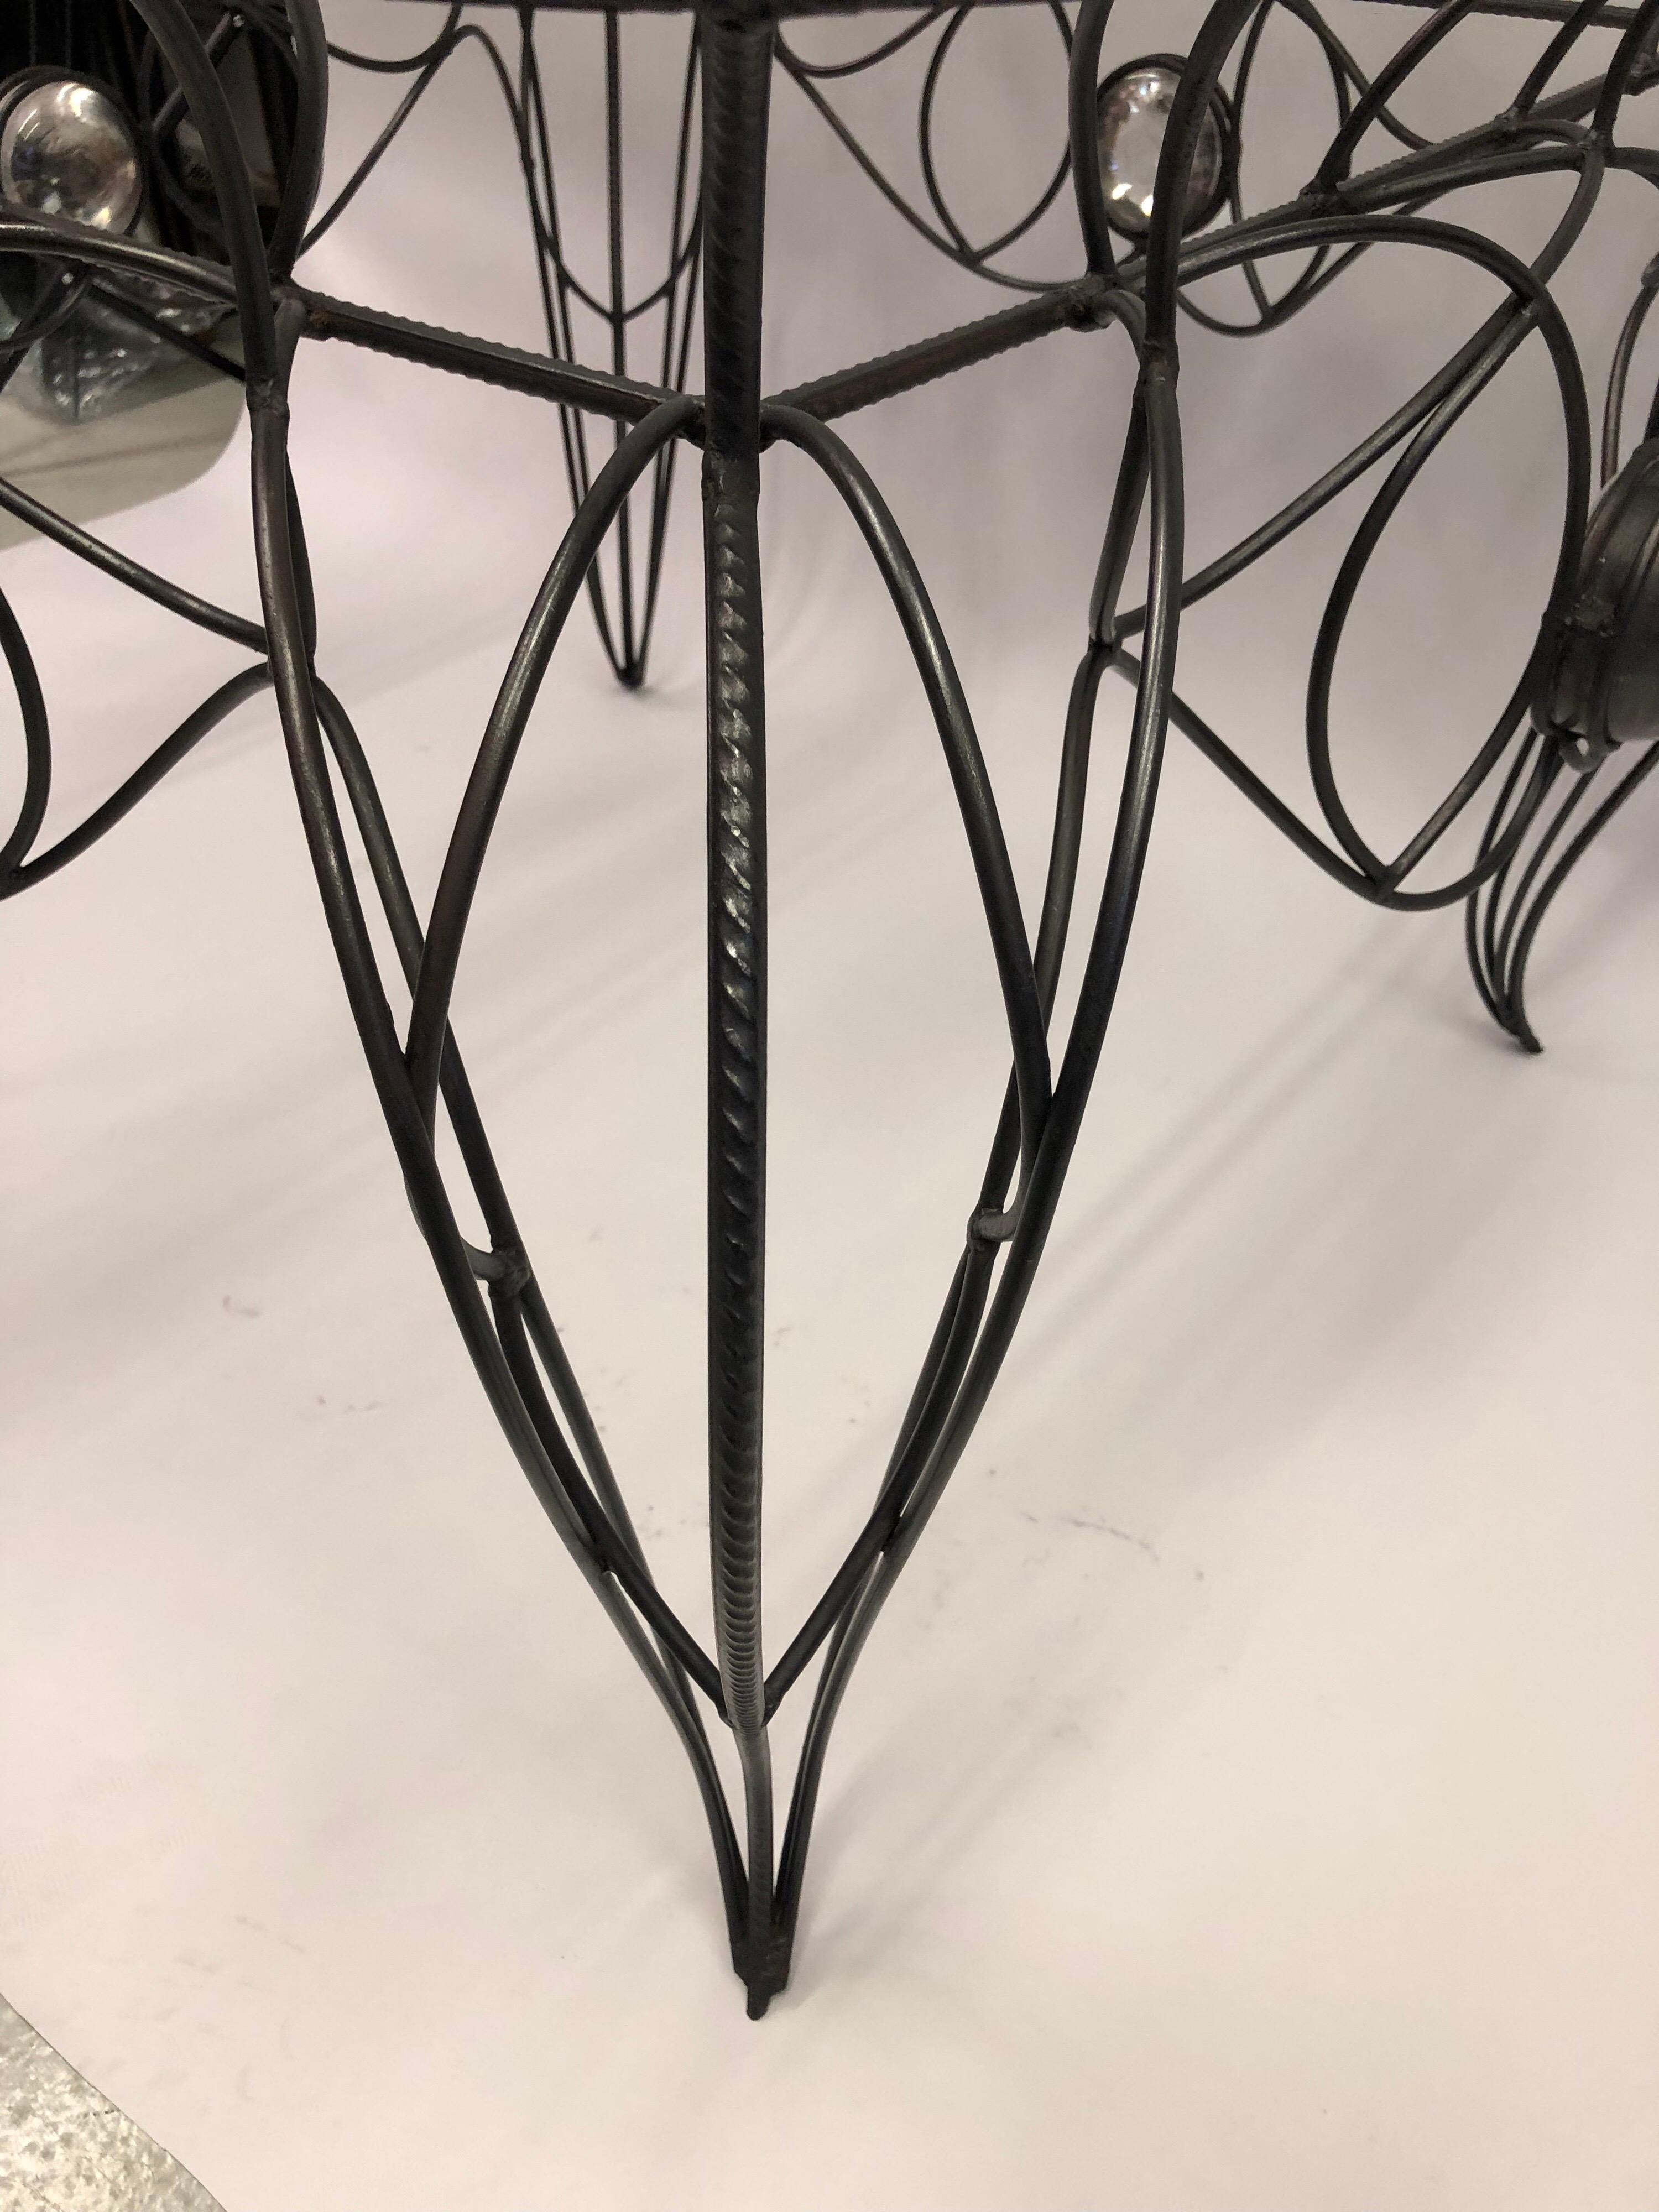 Unique Handwrought Iron & Crystal Center or Dining Table by Andre Dubreuil, 1986 For Sale 4